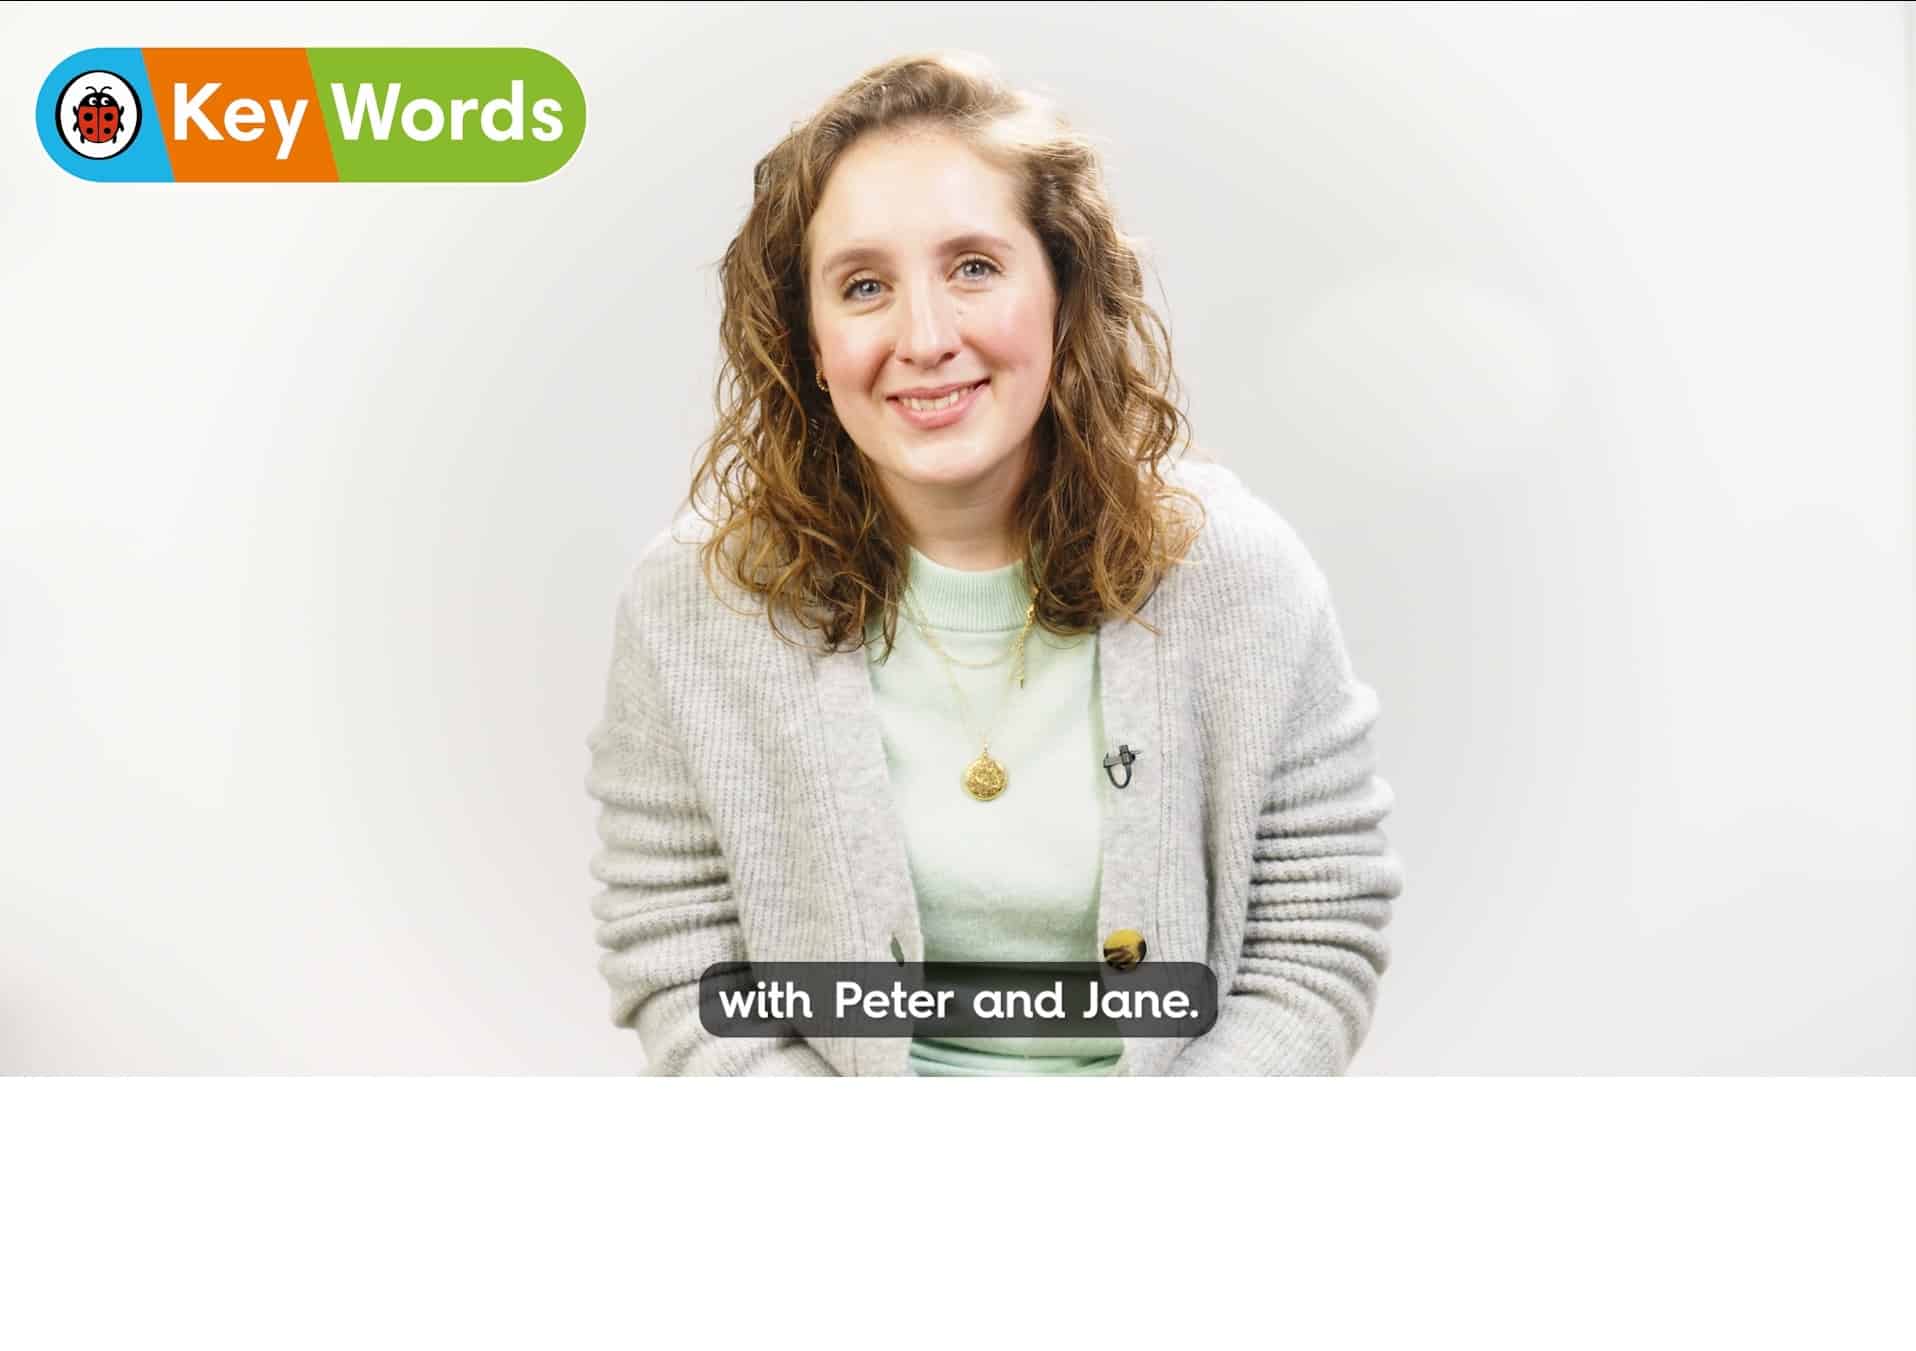 Introducing Key Words with Peter and Jane